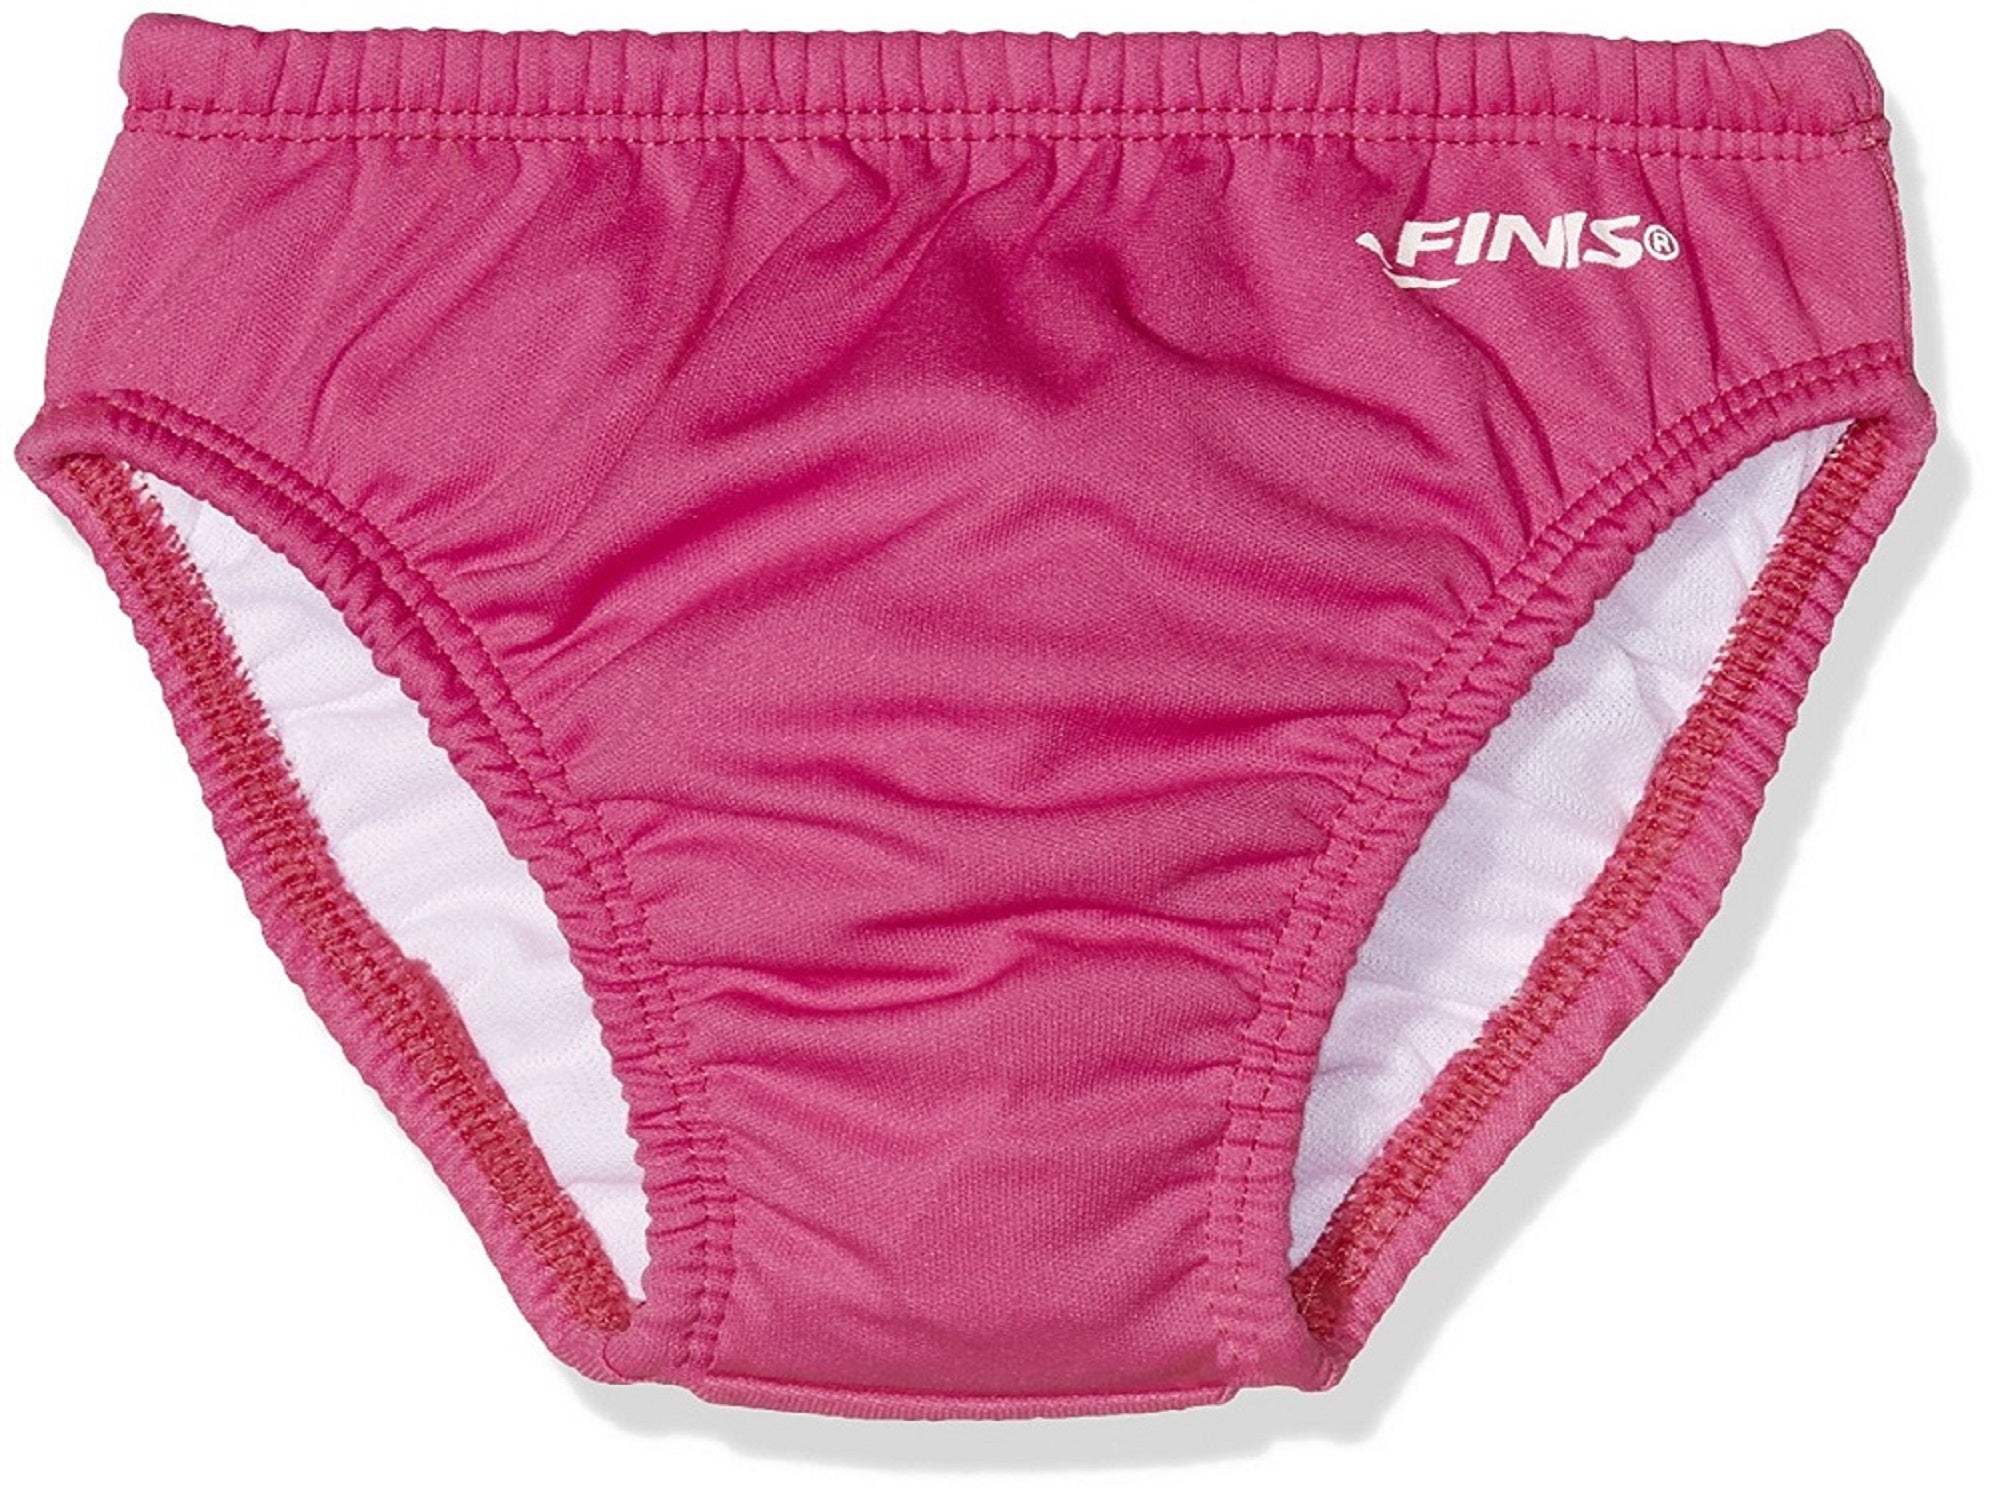 FINIS Solid Pink Reusable Swim Diaper, Small (3-6 Months)